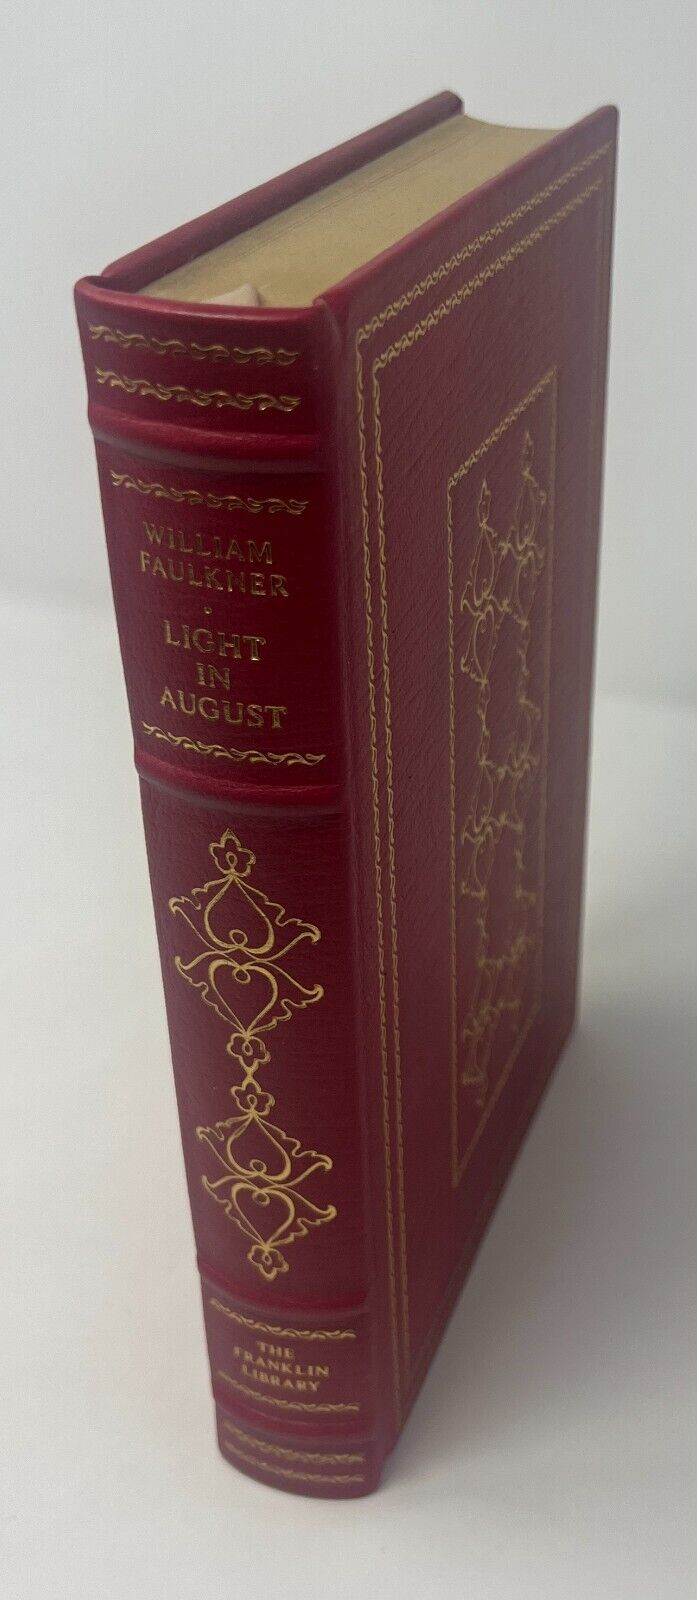 1979 Light In August by William Faulkner Franklin Library Hardcover Book